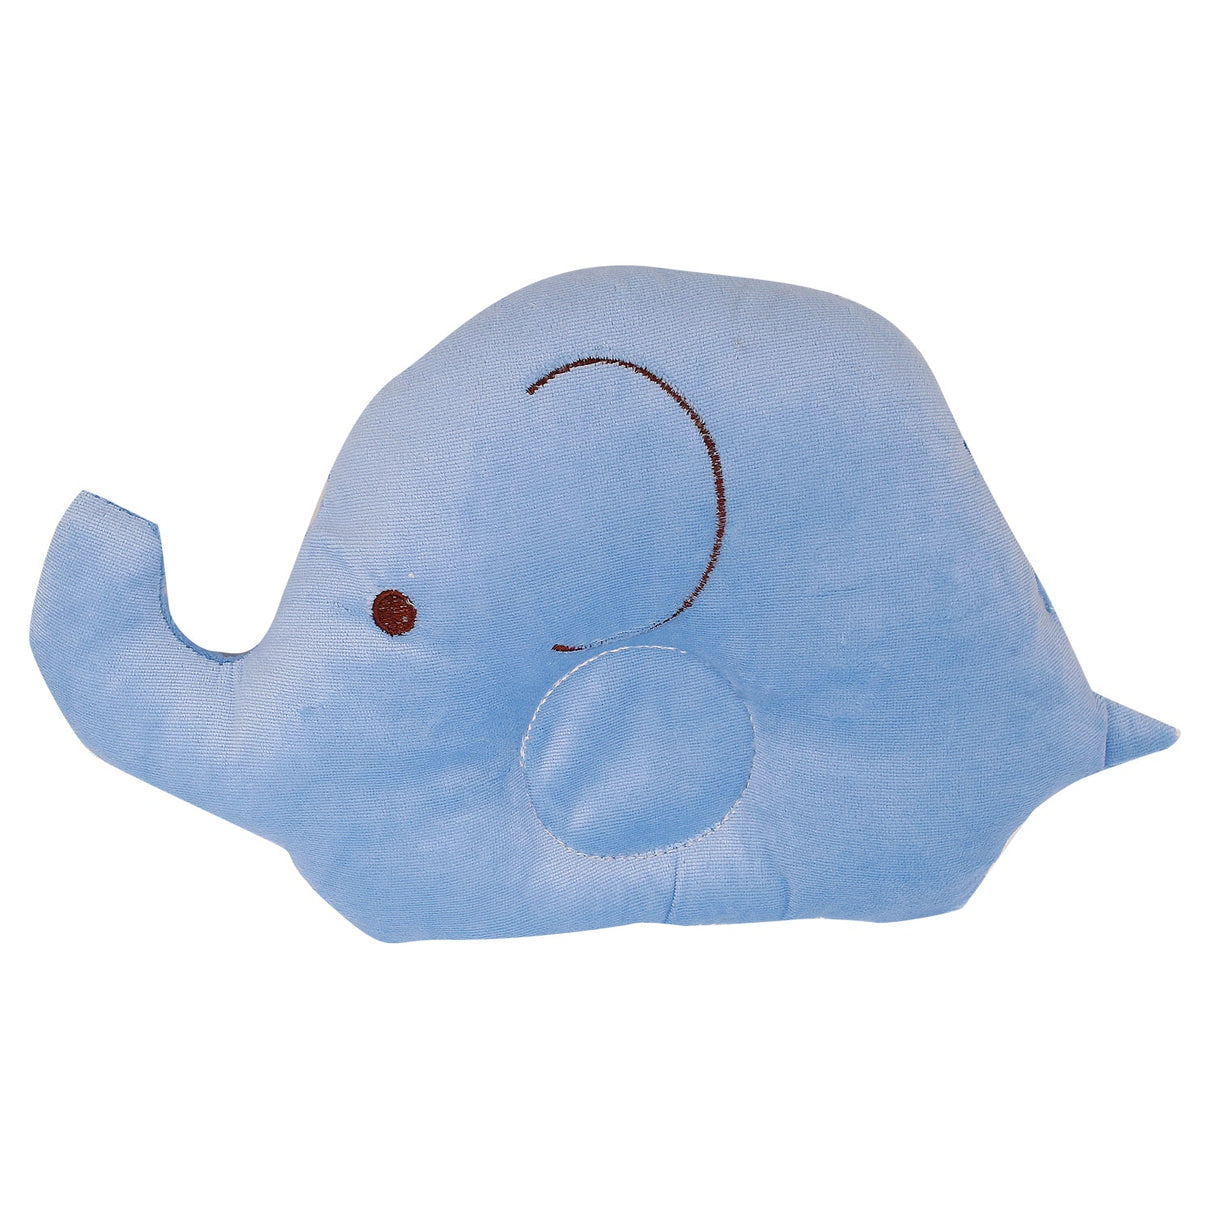 Elephant Shaped Baby Pillow